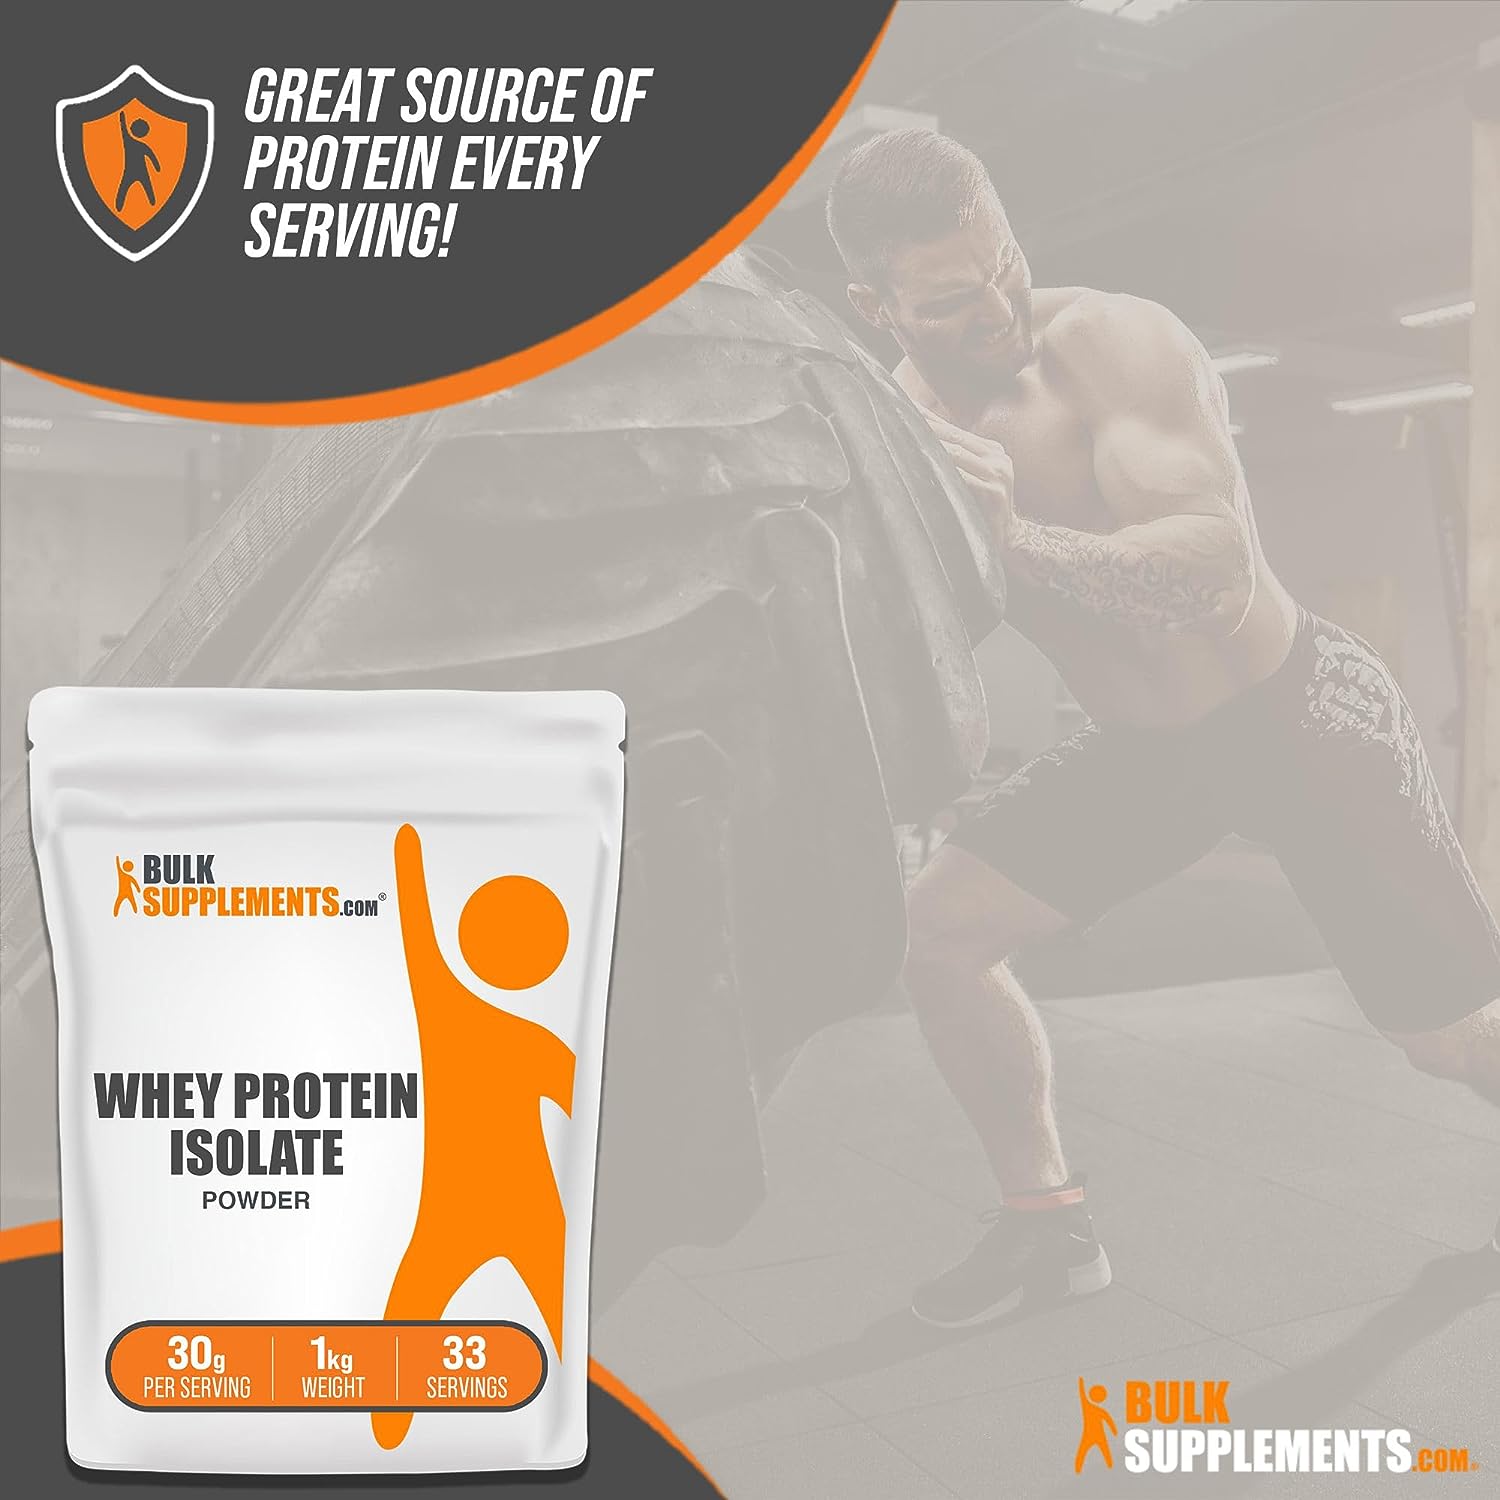 BULKSUPPLEMENTS.COM Whey Protein Isolate Powder - Whey Protein - Flavo